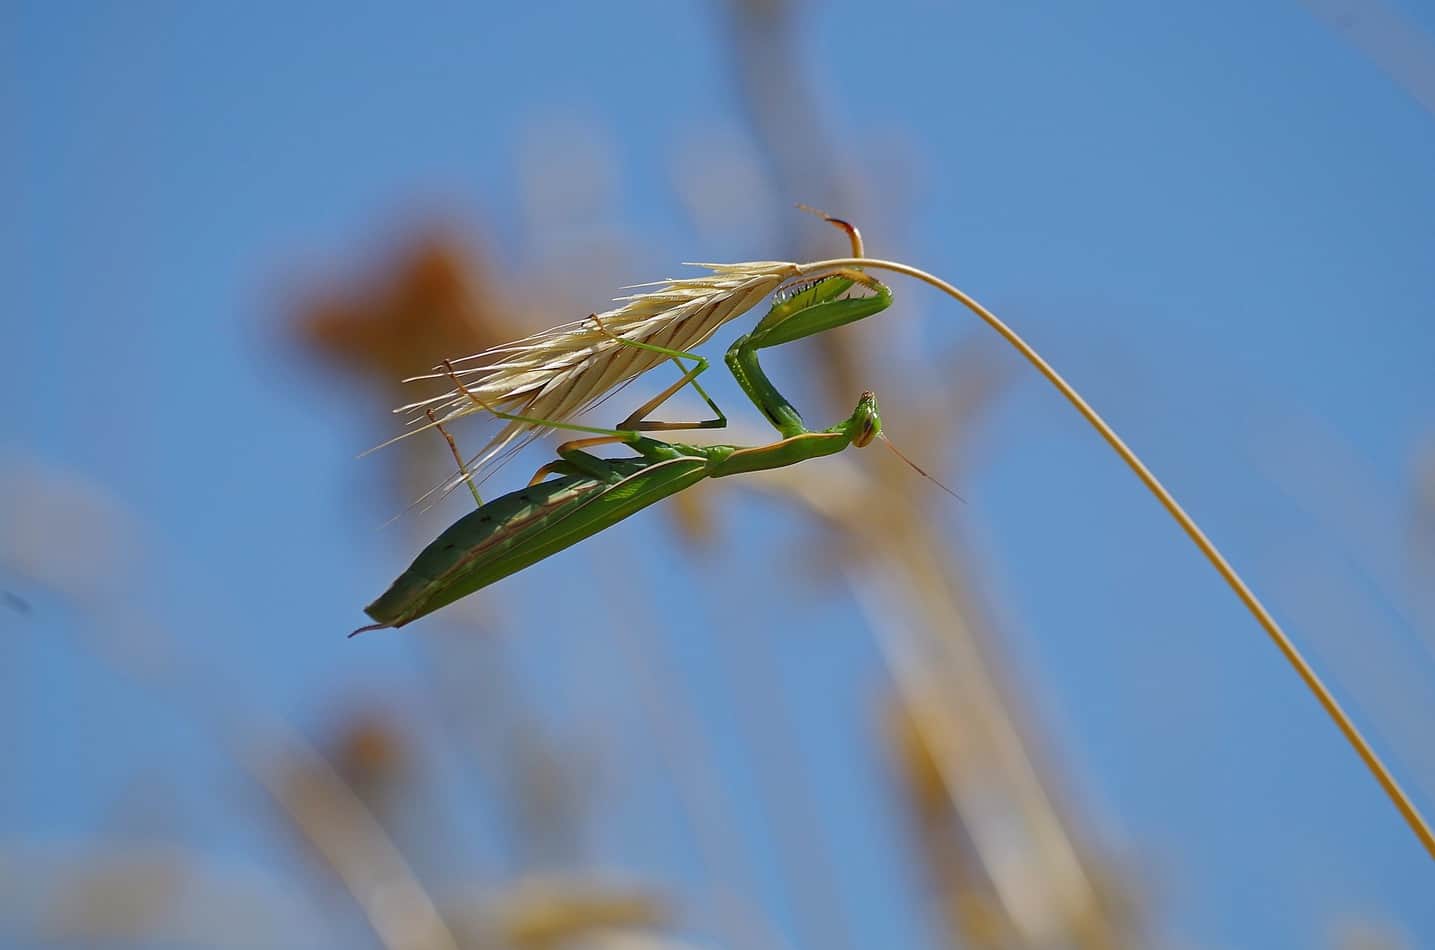 The praying mantis lives on plants, trees and shrubs, and can change color to camouflage itself depending on its habitat.